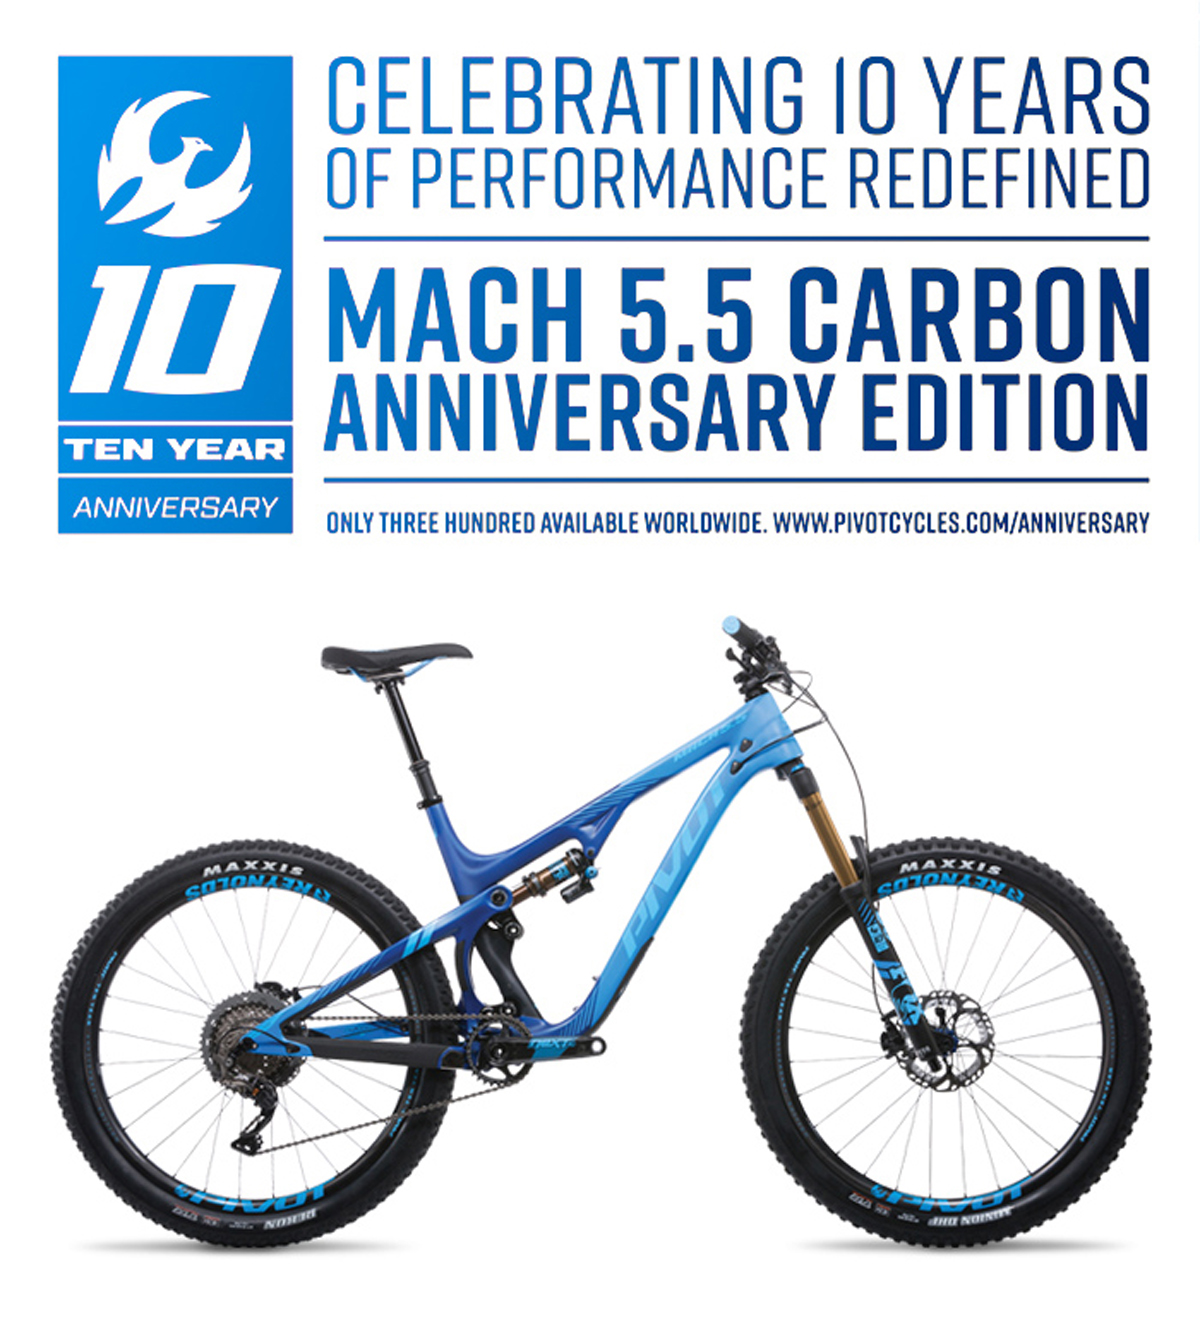 Pivot turns 10 with limited Anniversary Edition Mach 5.5 Carbon Trail bikes